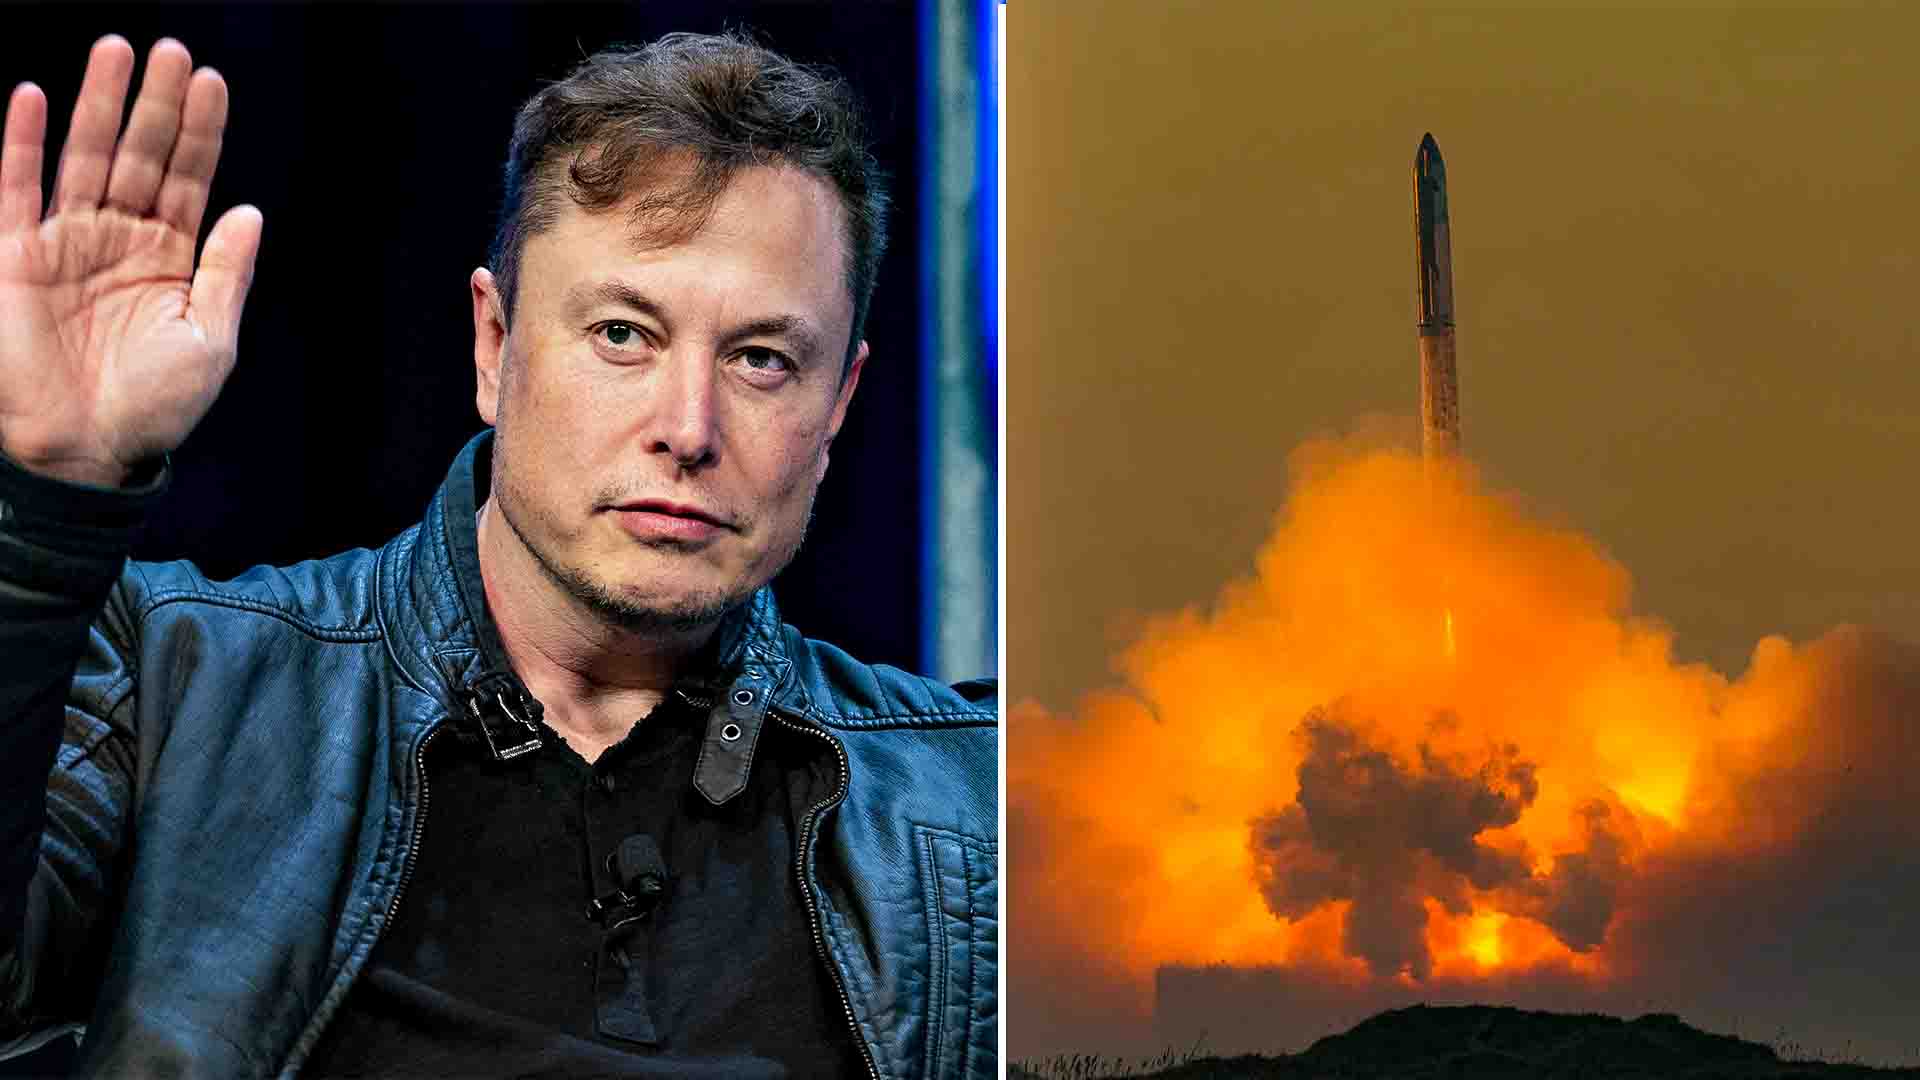 "We Will Not Back Down" SpaceX Launches Super Heavy Starship Rocket But Test Flight Fails